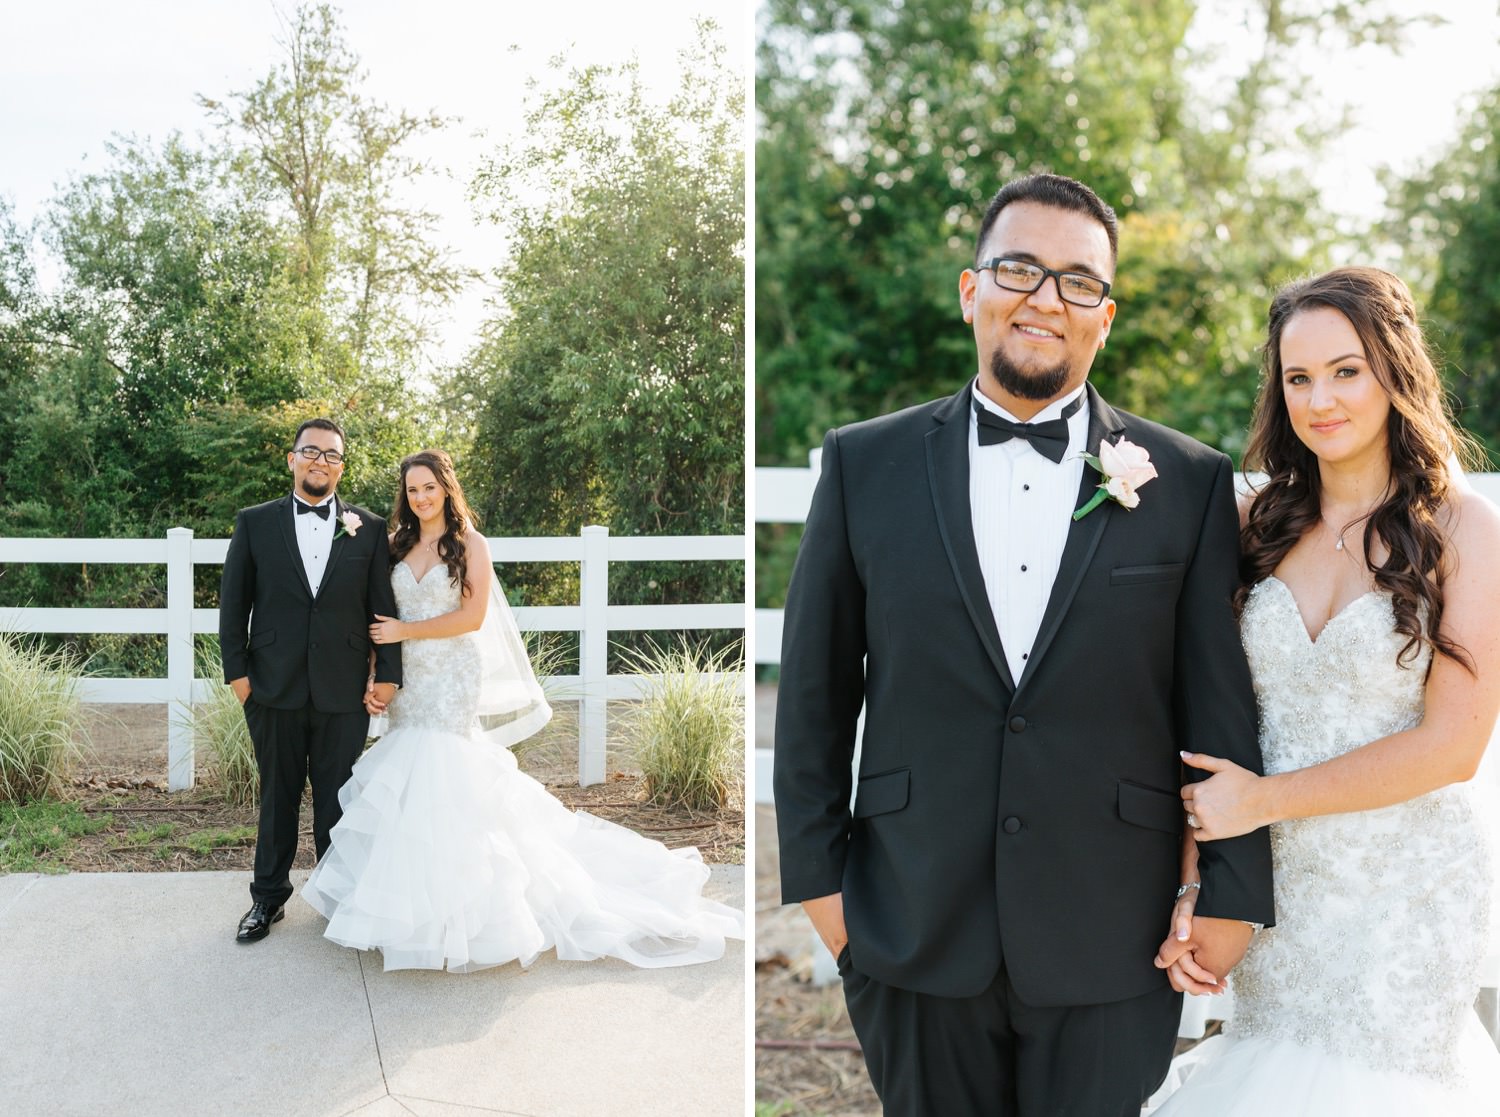 Classic and Romantic Bride and Groom Portraits - https://brittneyhannonphotography.com